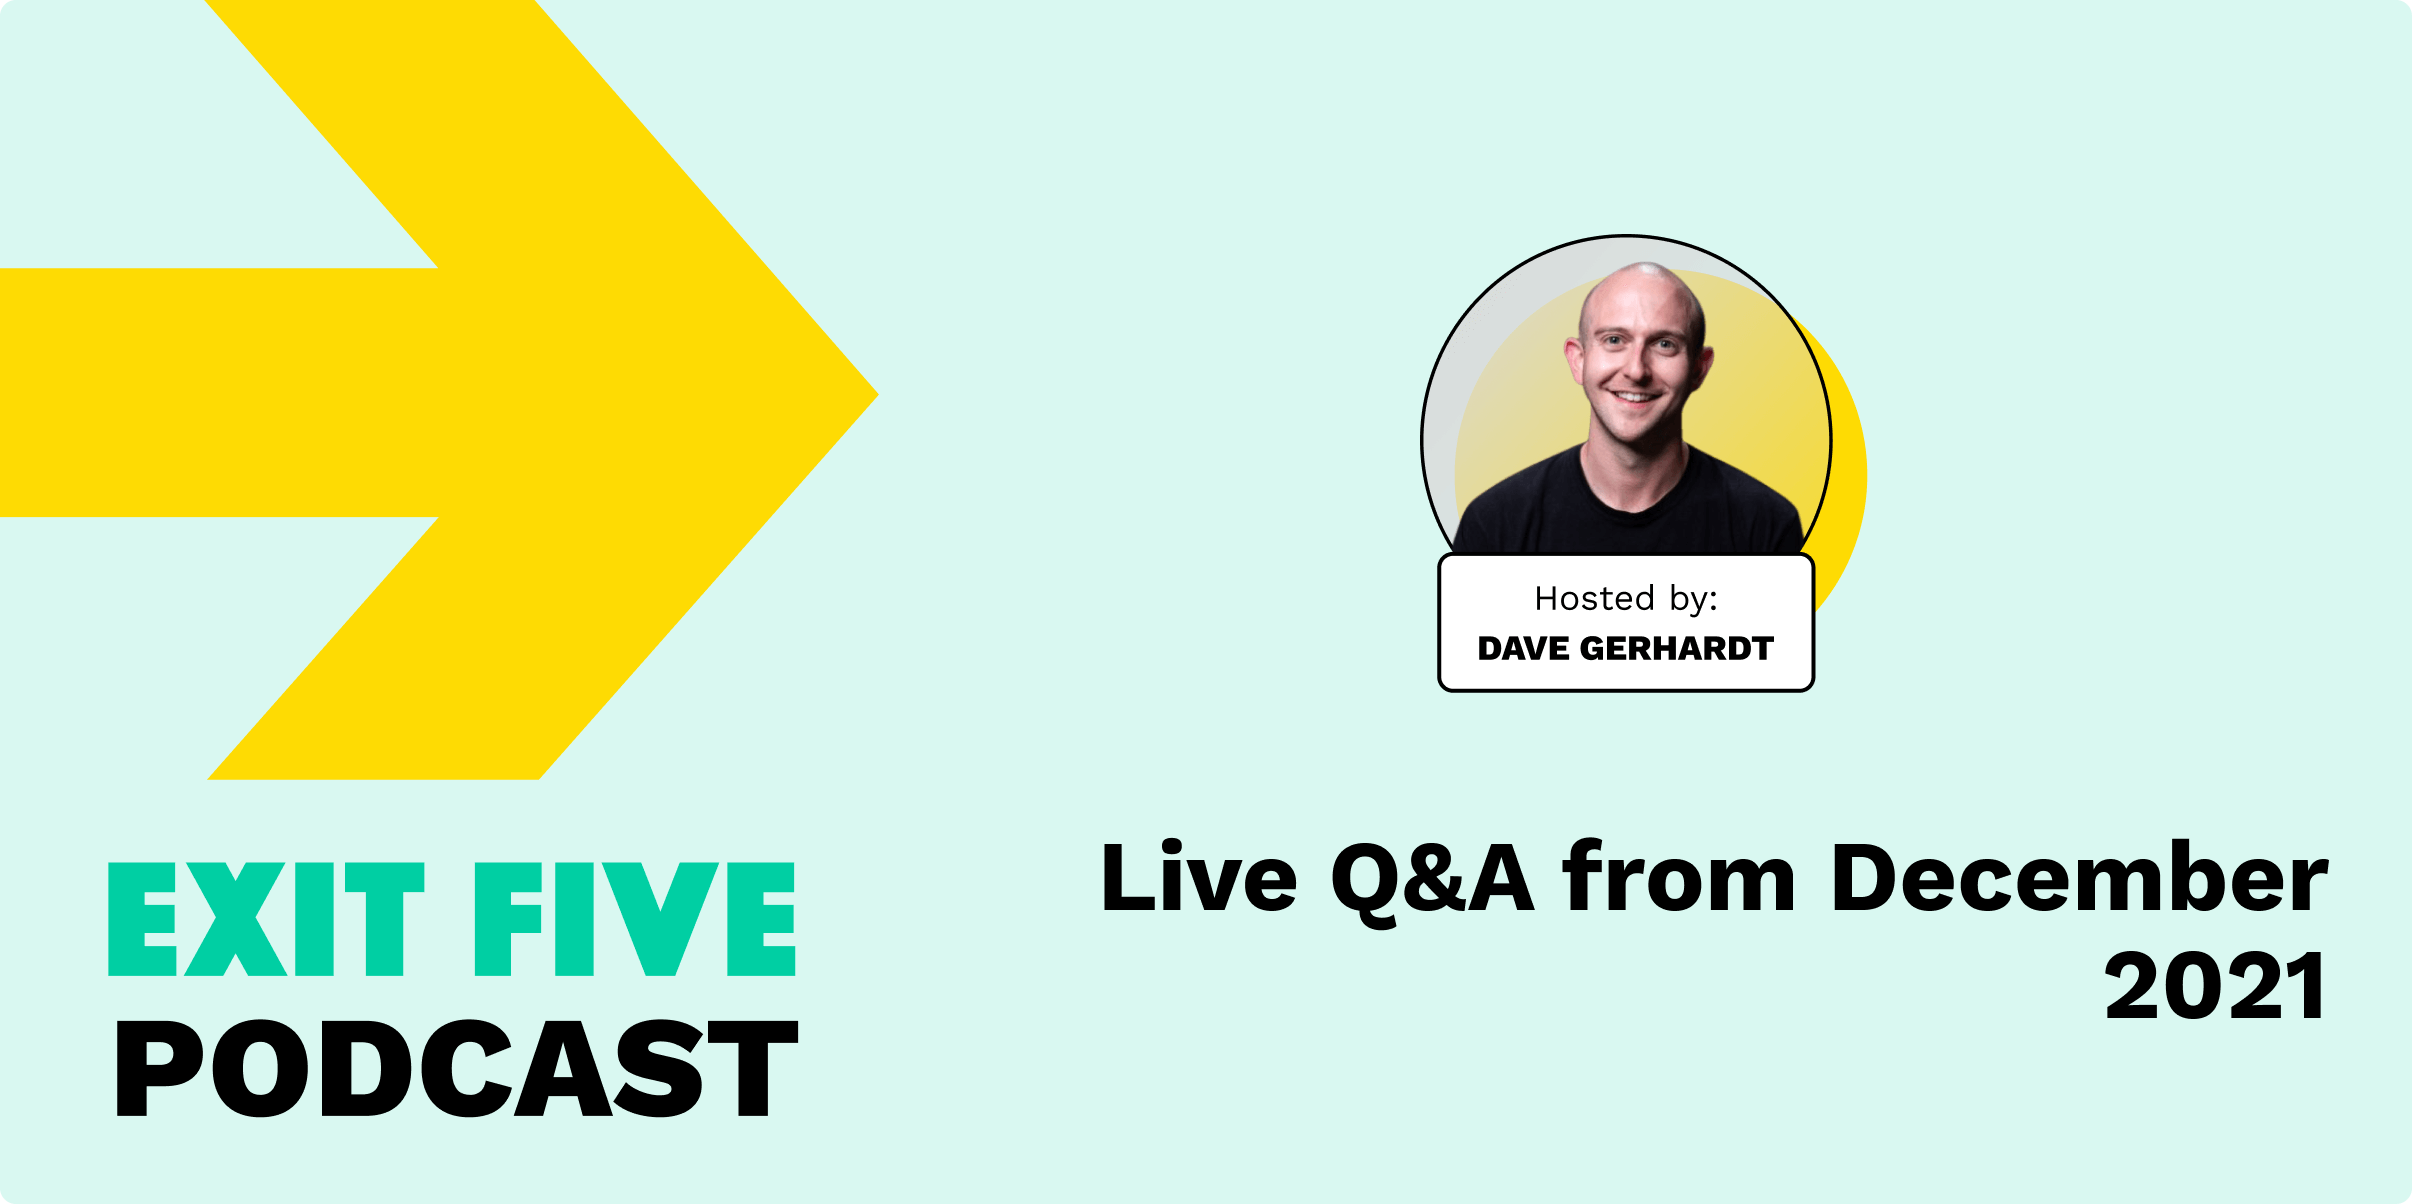 Live Q&A from December 2021